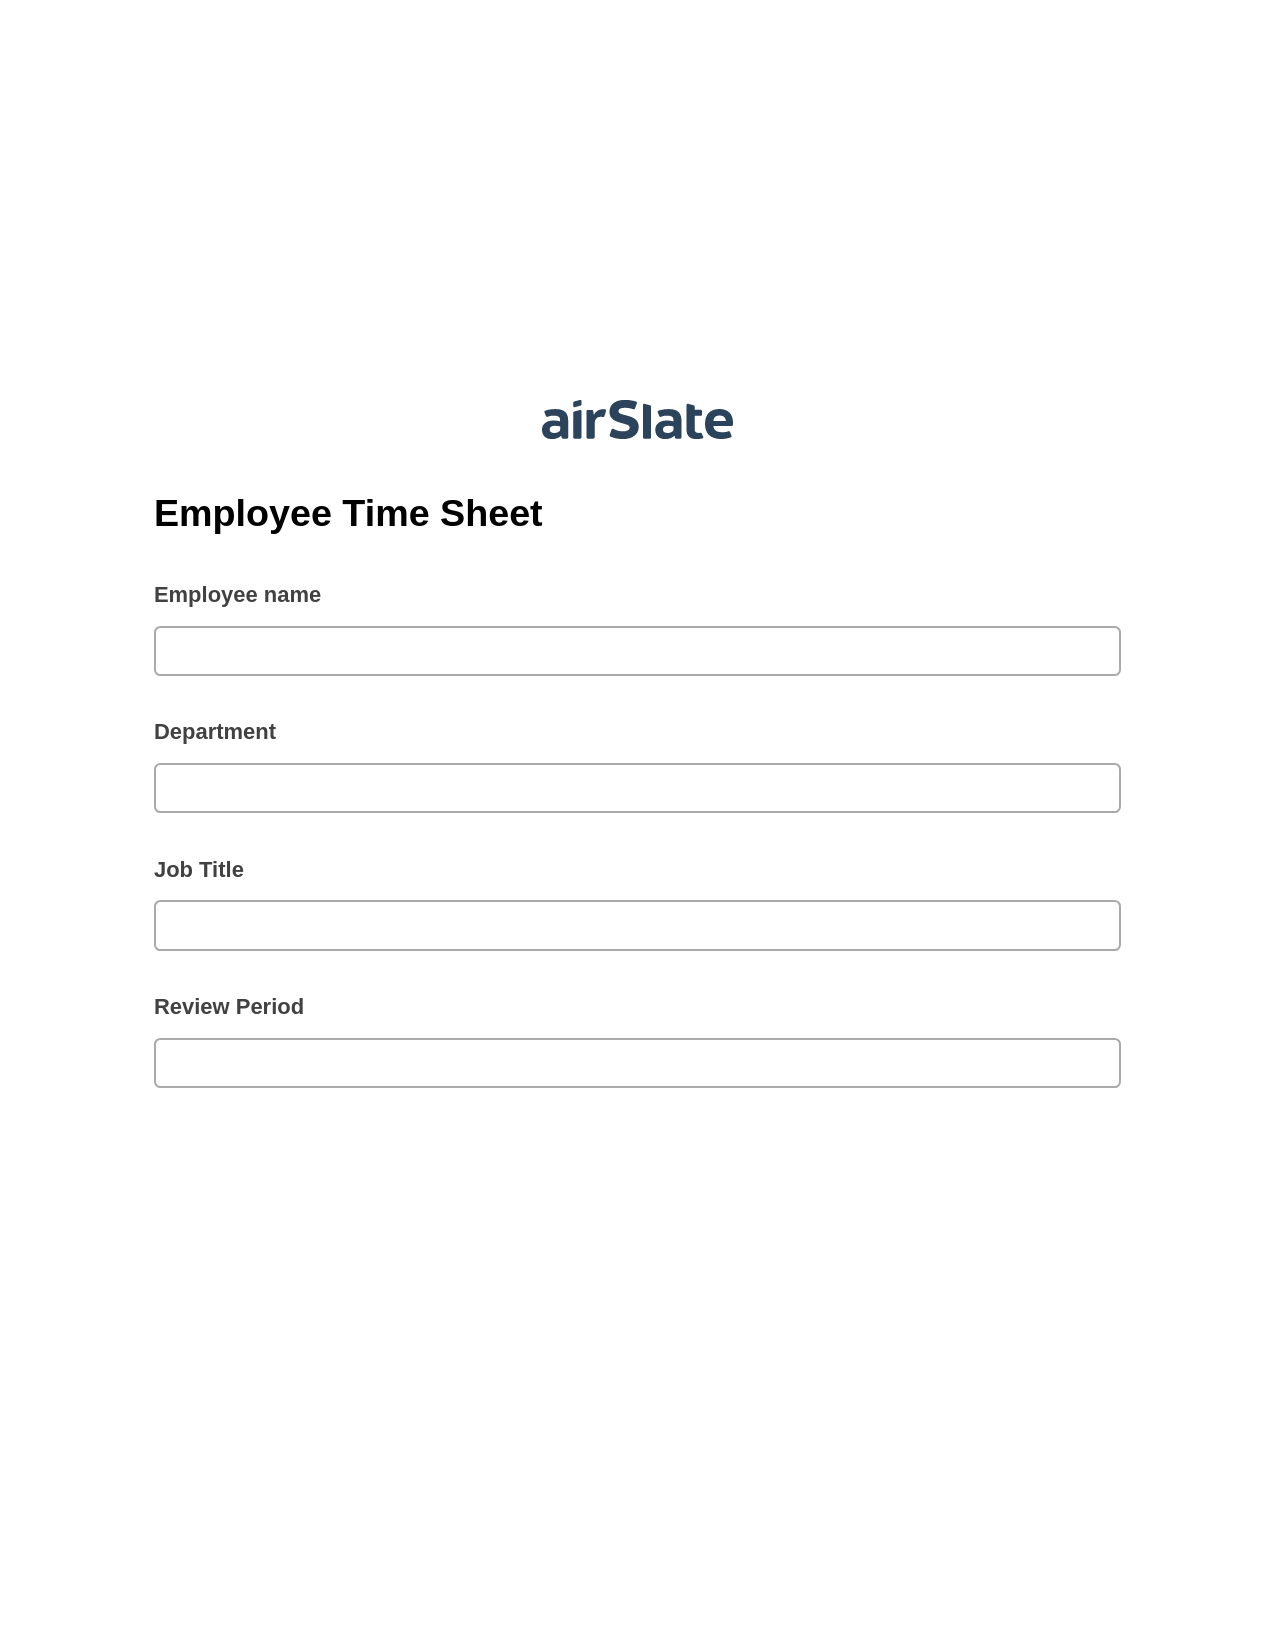 Employee Time Sheet Pre-fill from CSV File Bot, Create Salesforce Records Bot, Export to Excel 365 Bot